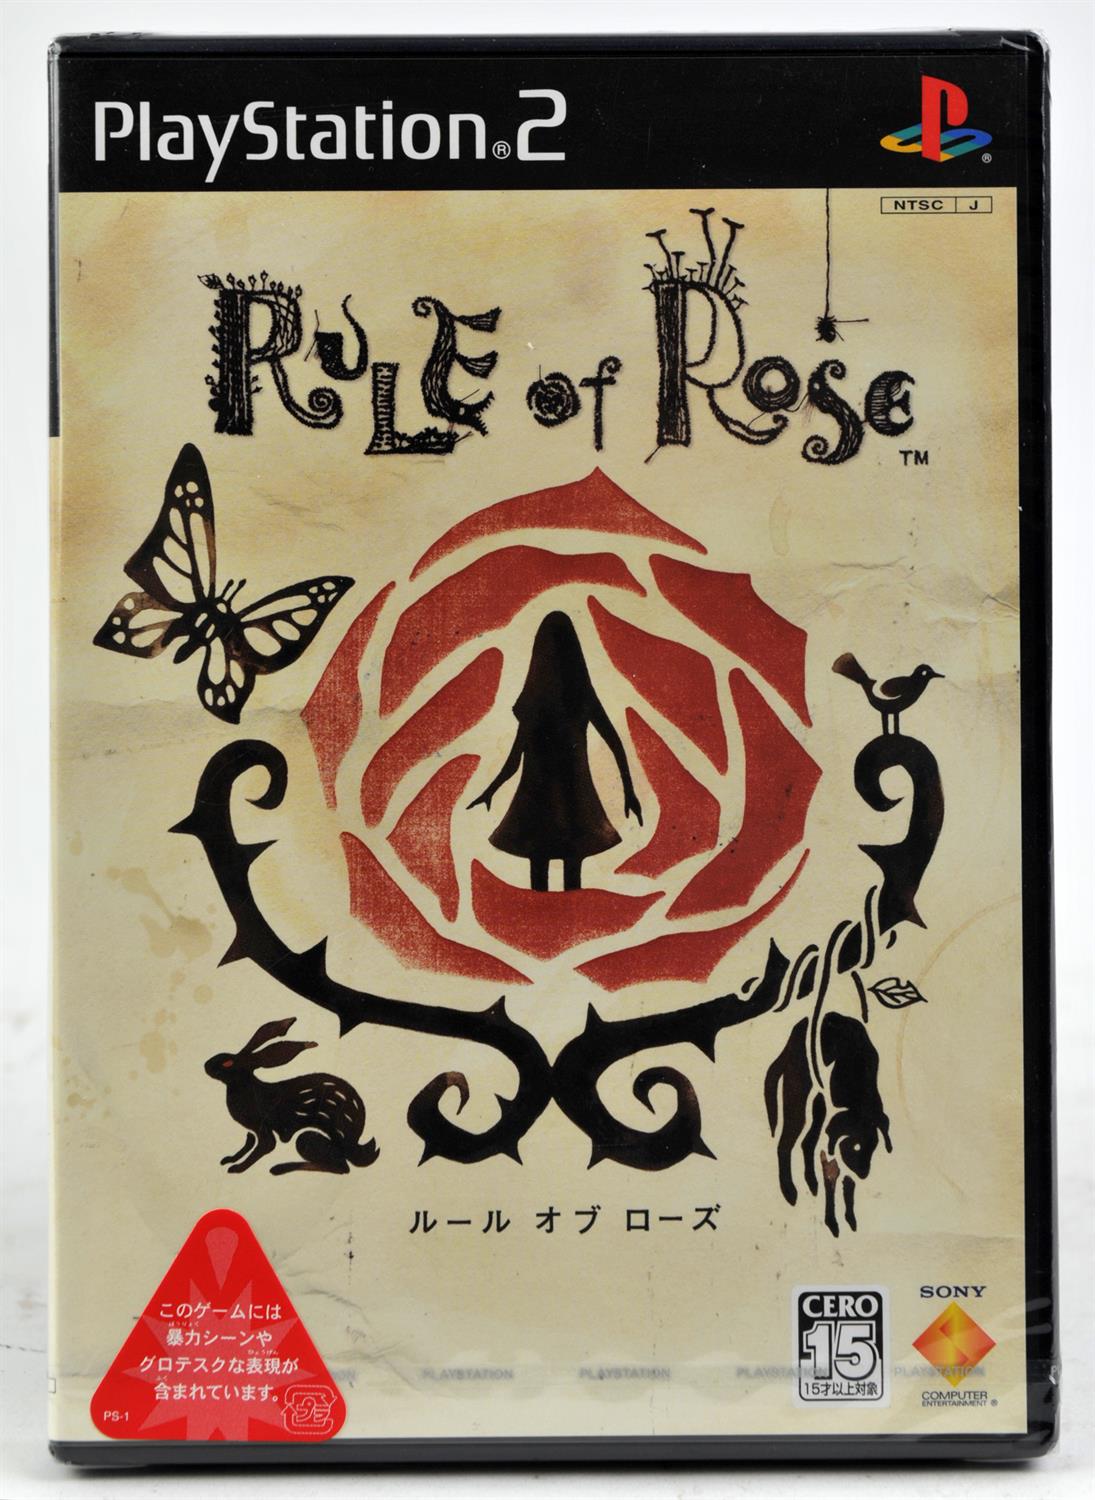 PlayStation 2 (PS2) Rule of Rose factory sealed NTSC-J game. Rule of Rose is a survival horror